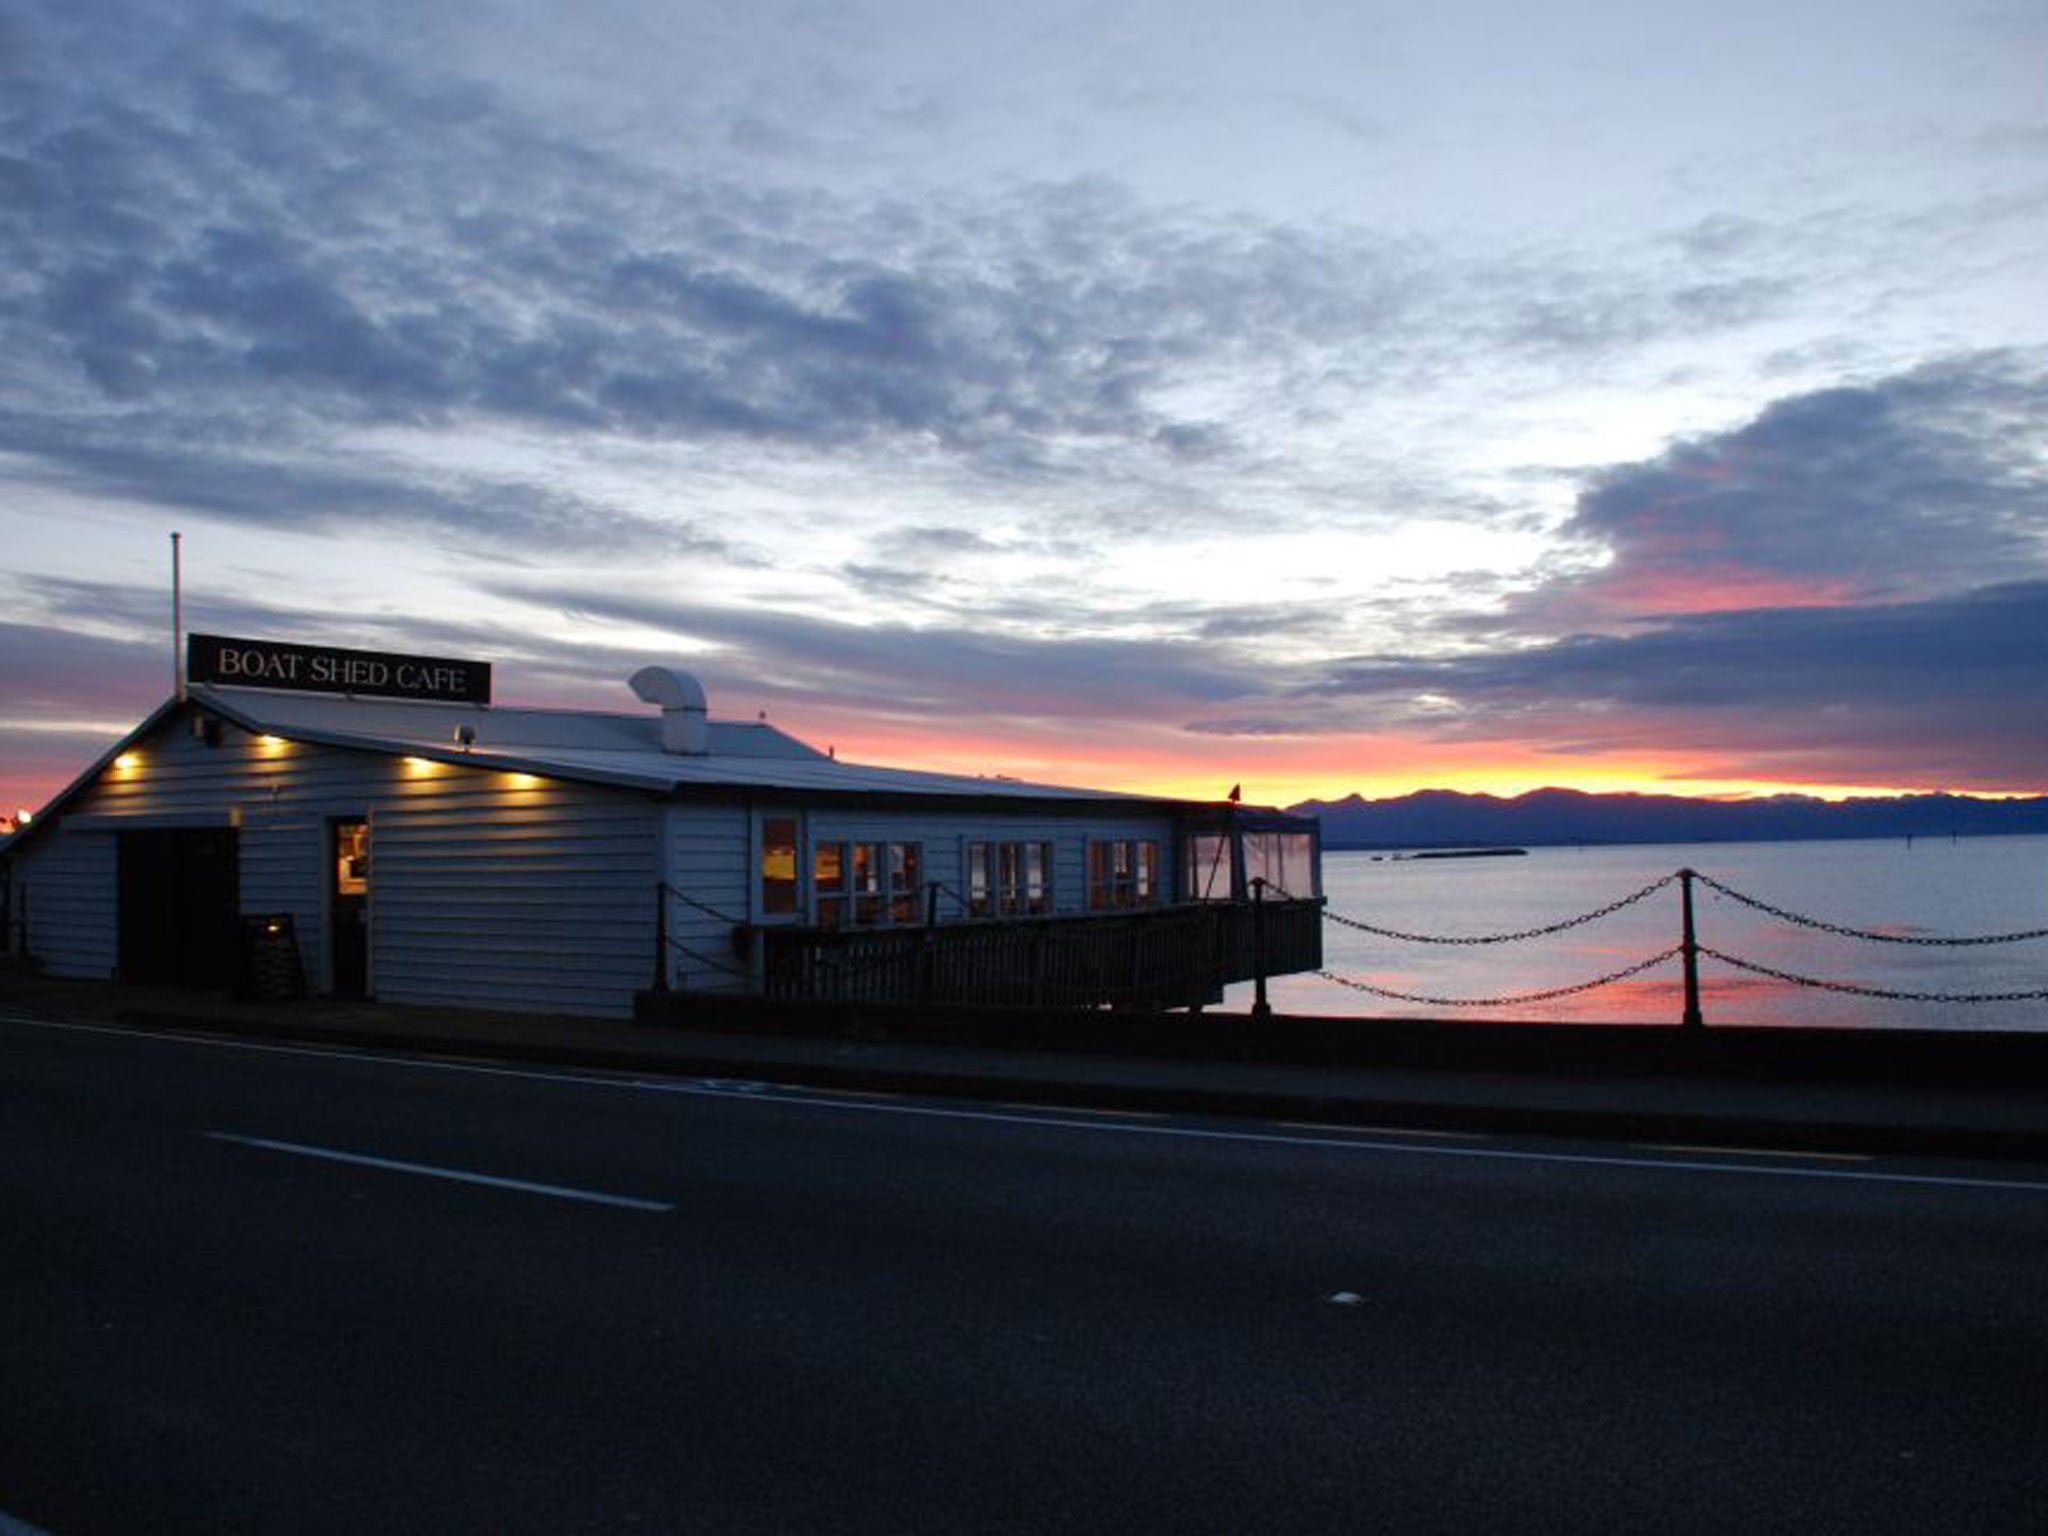 Kiwi cuisine: the Boat Shed in Nelson, New Zealand